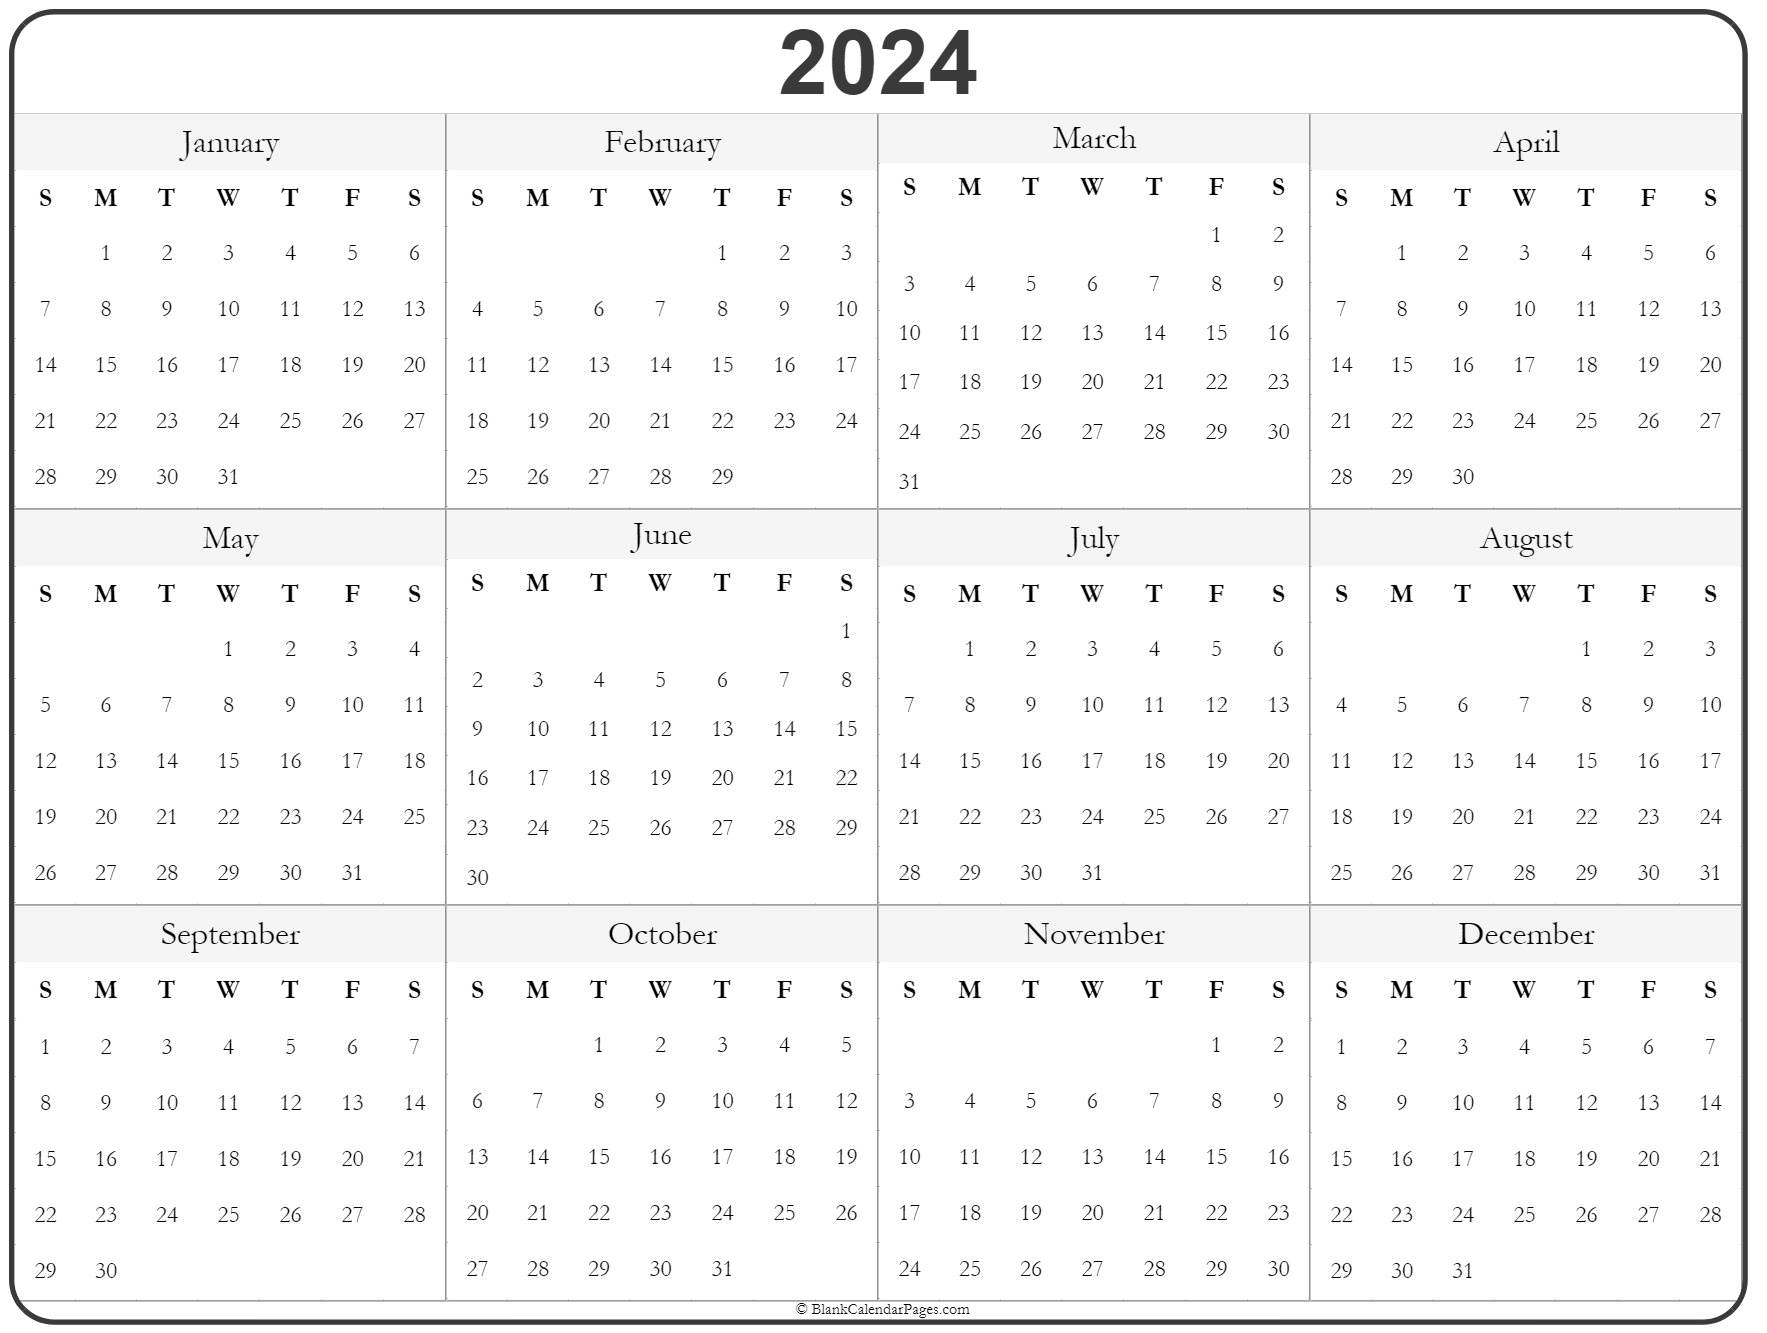 2024 Calendar Pdf Word Excel 2024 Calendar Pdf Word Excel Free - Free Printable 2024 Word Calendar 12 Pages